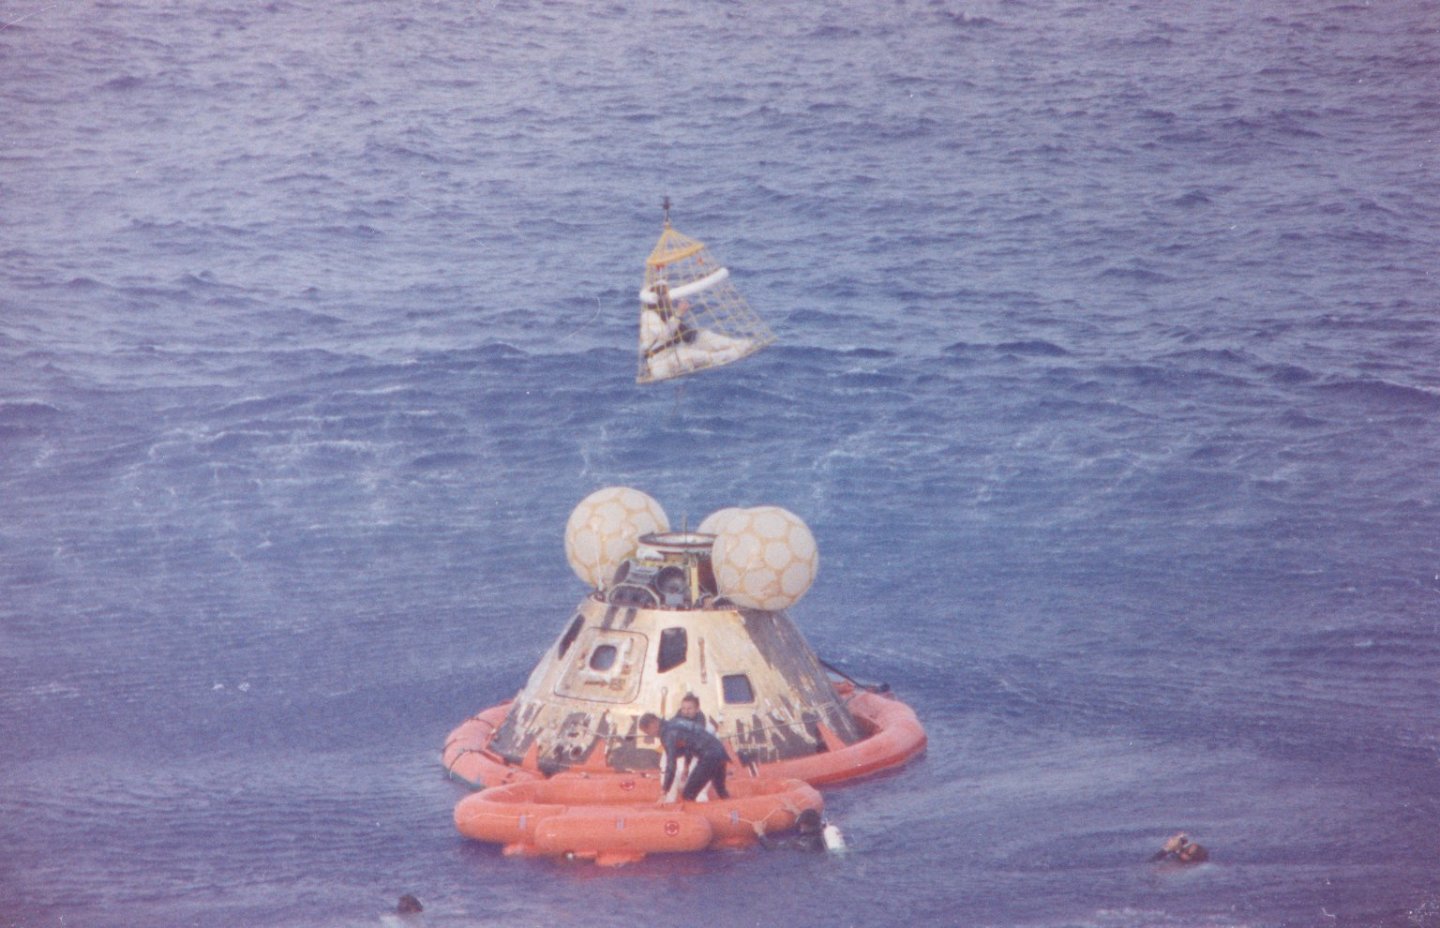 Apollo 13 being recovered after splashdown